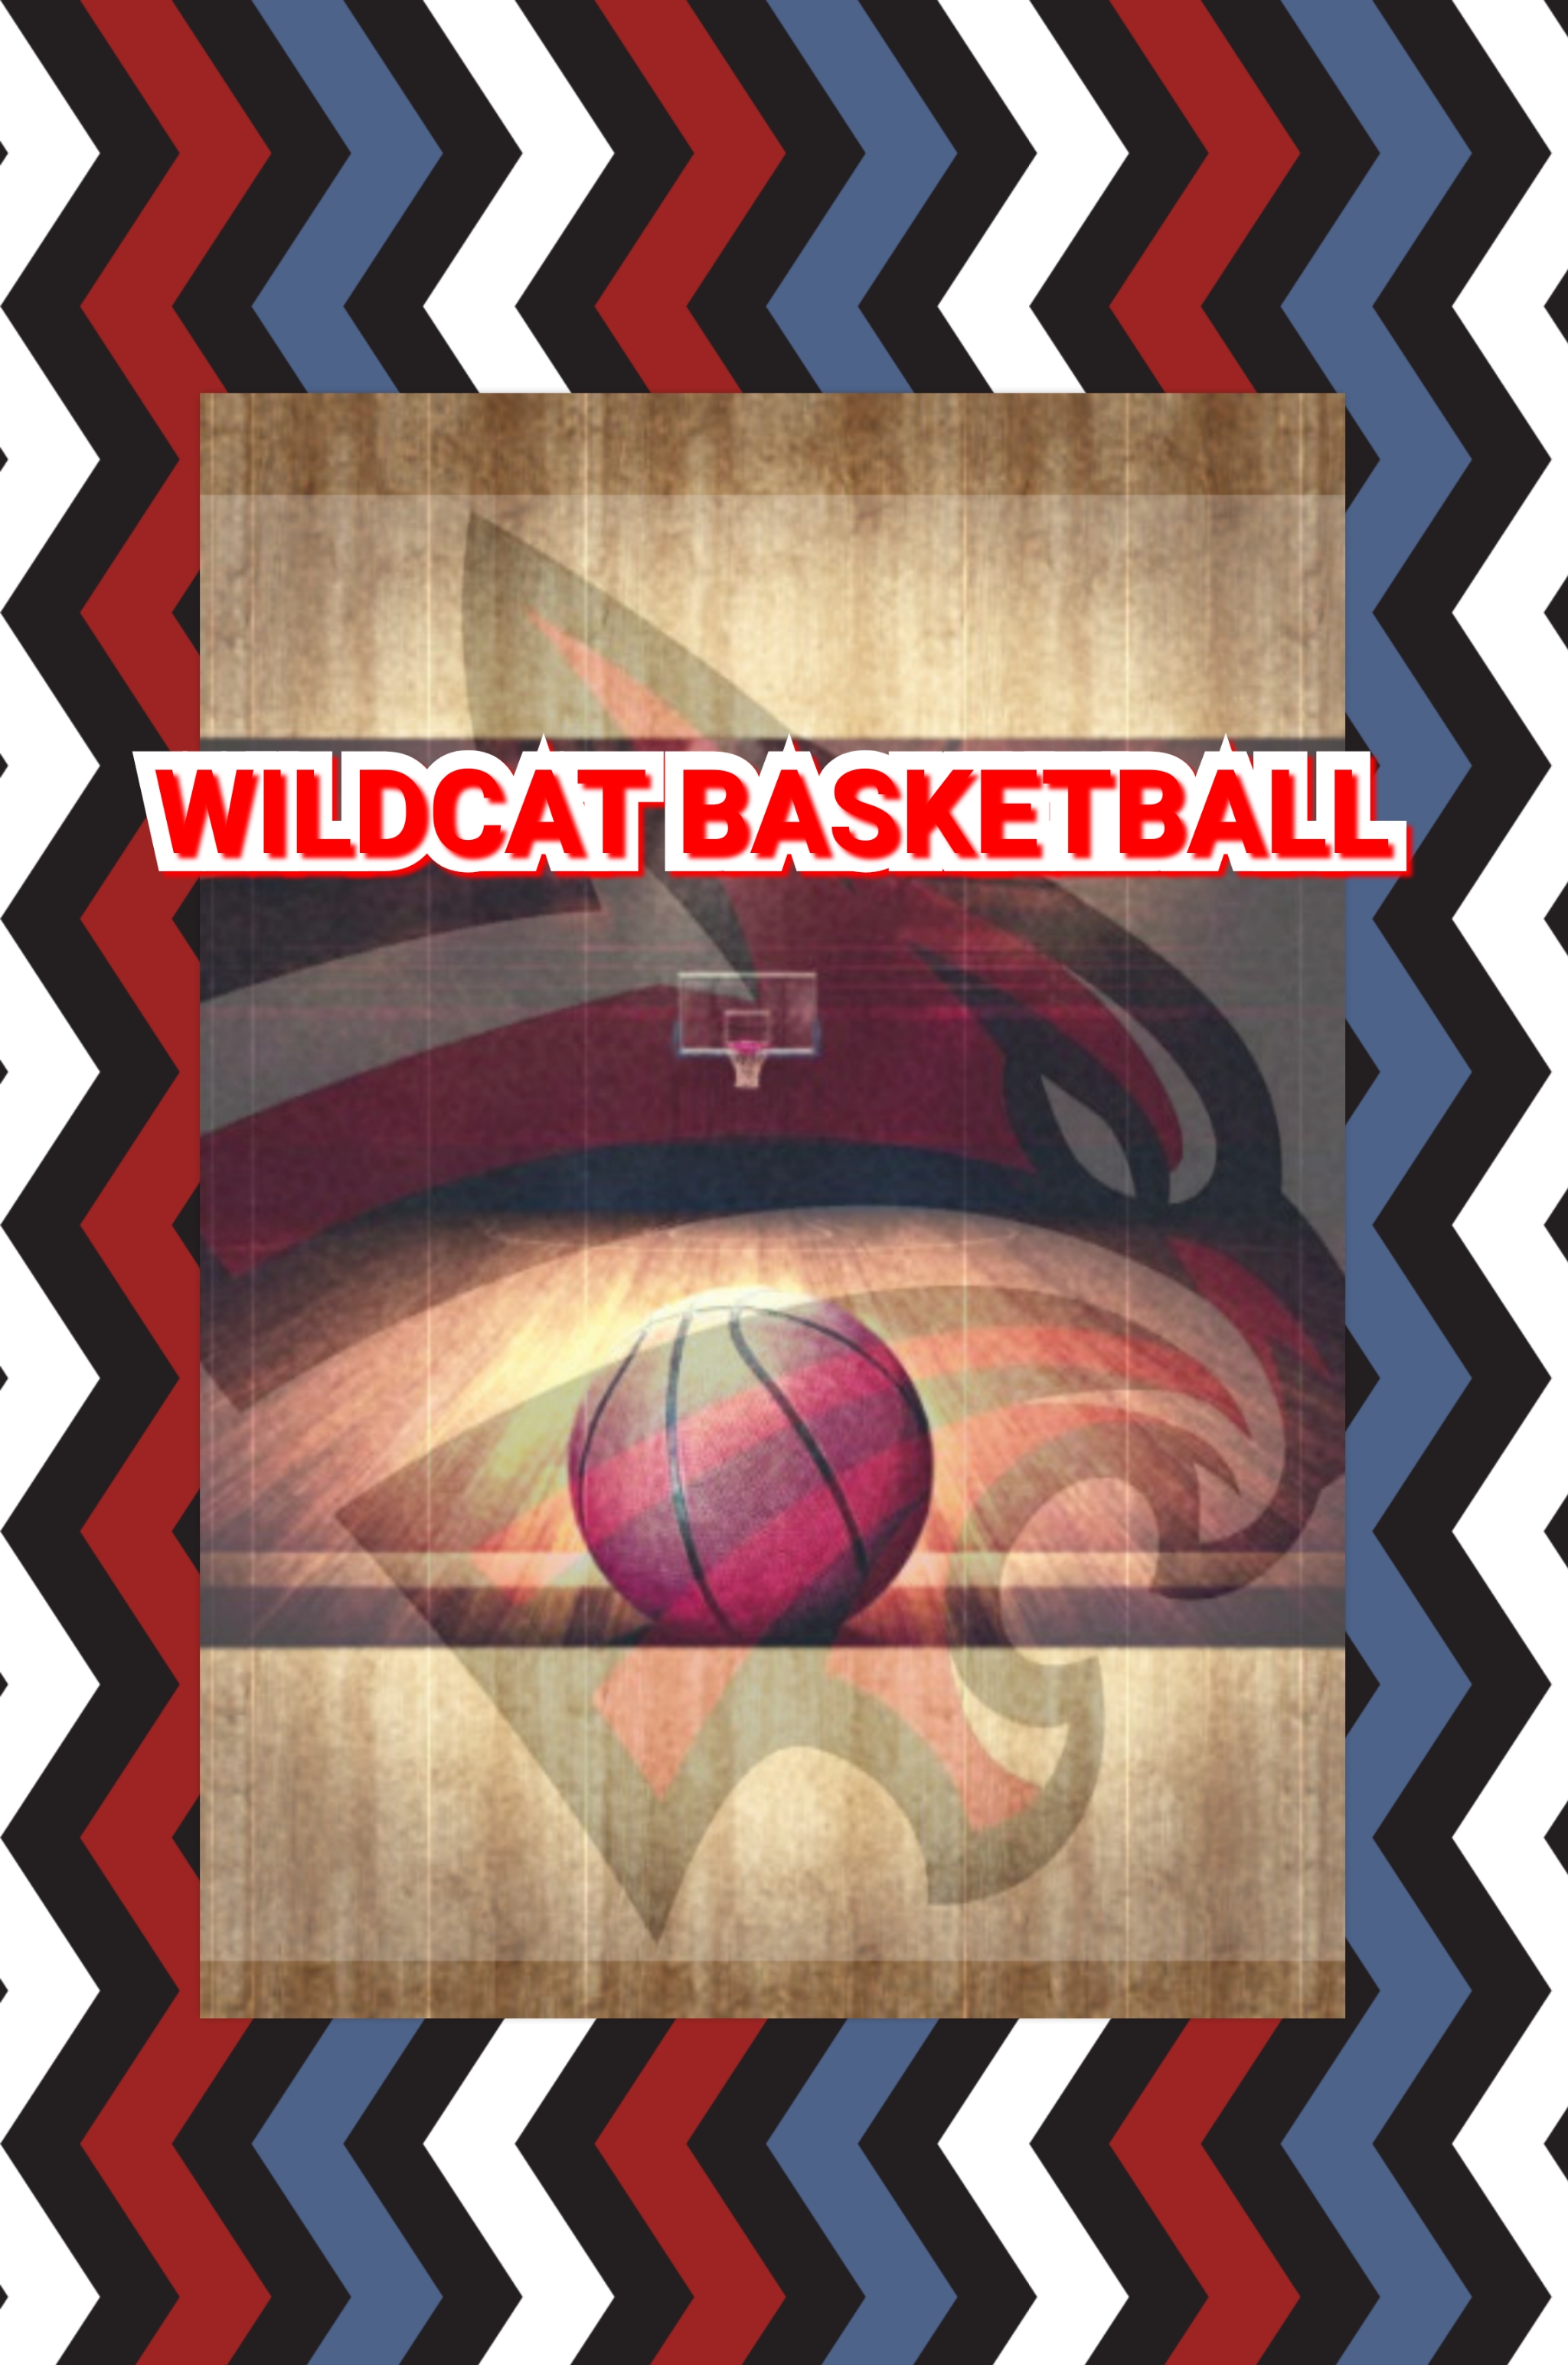 Ladycats Basketball Expect Exciting Season